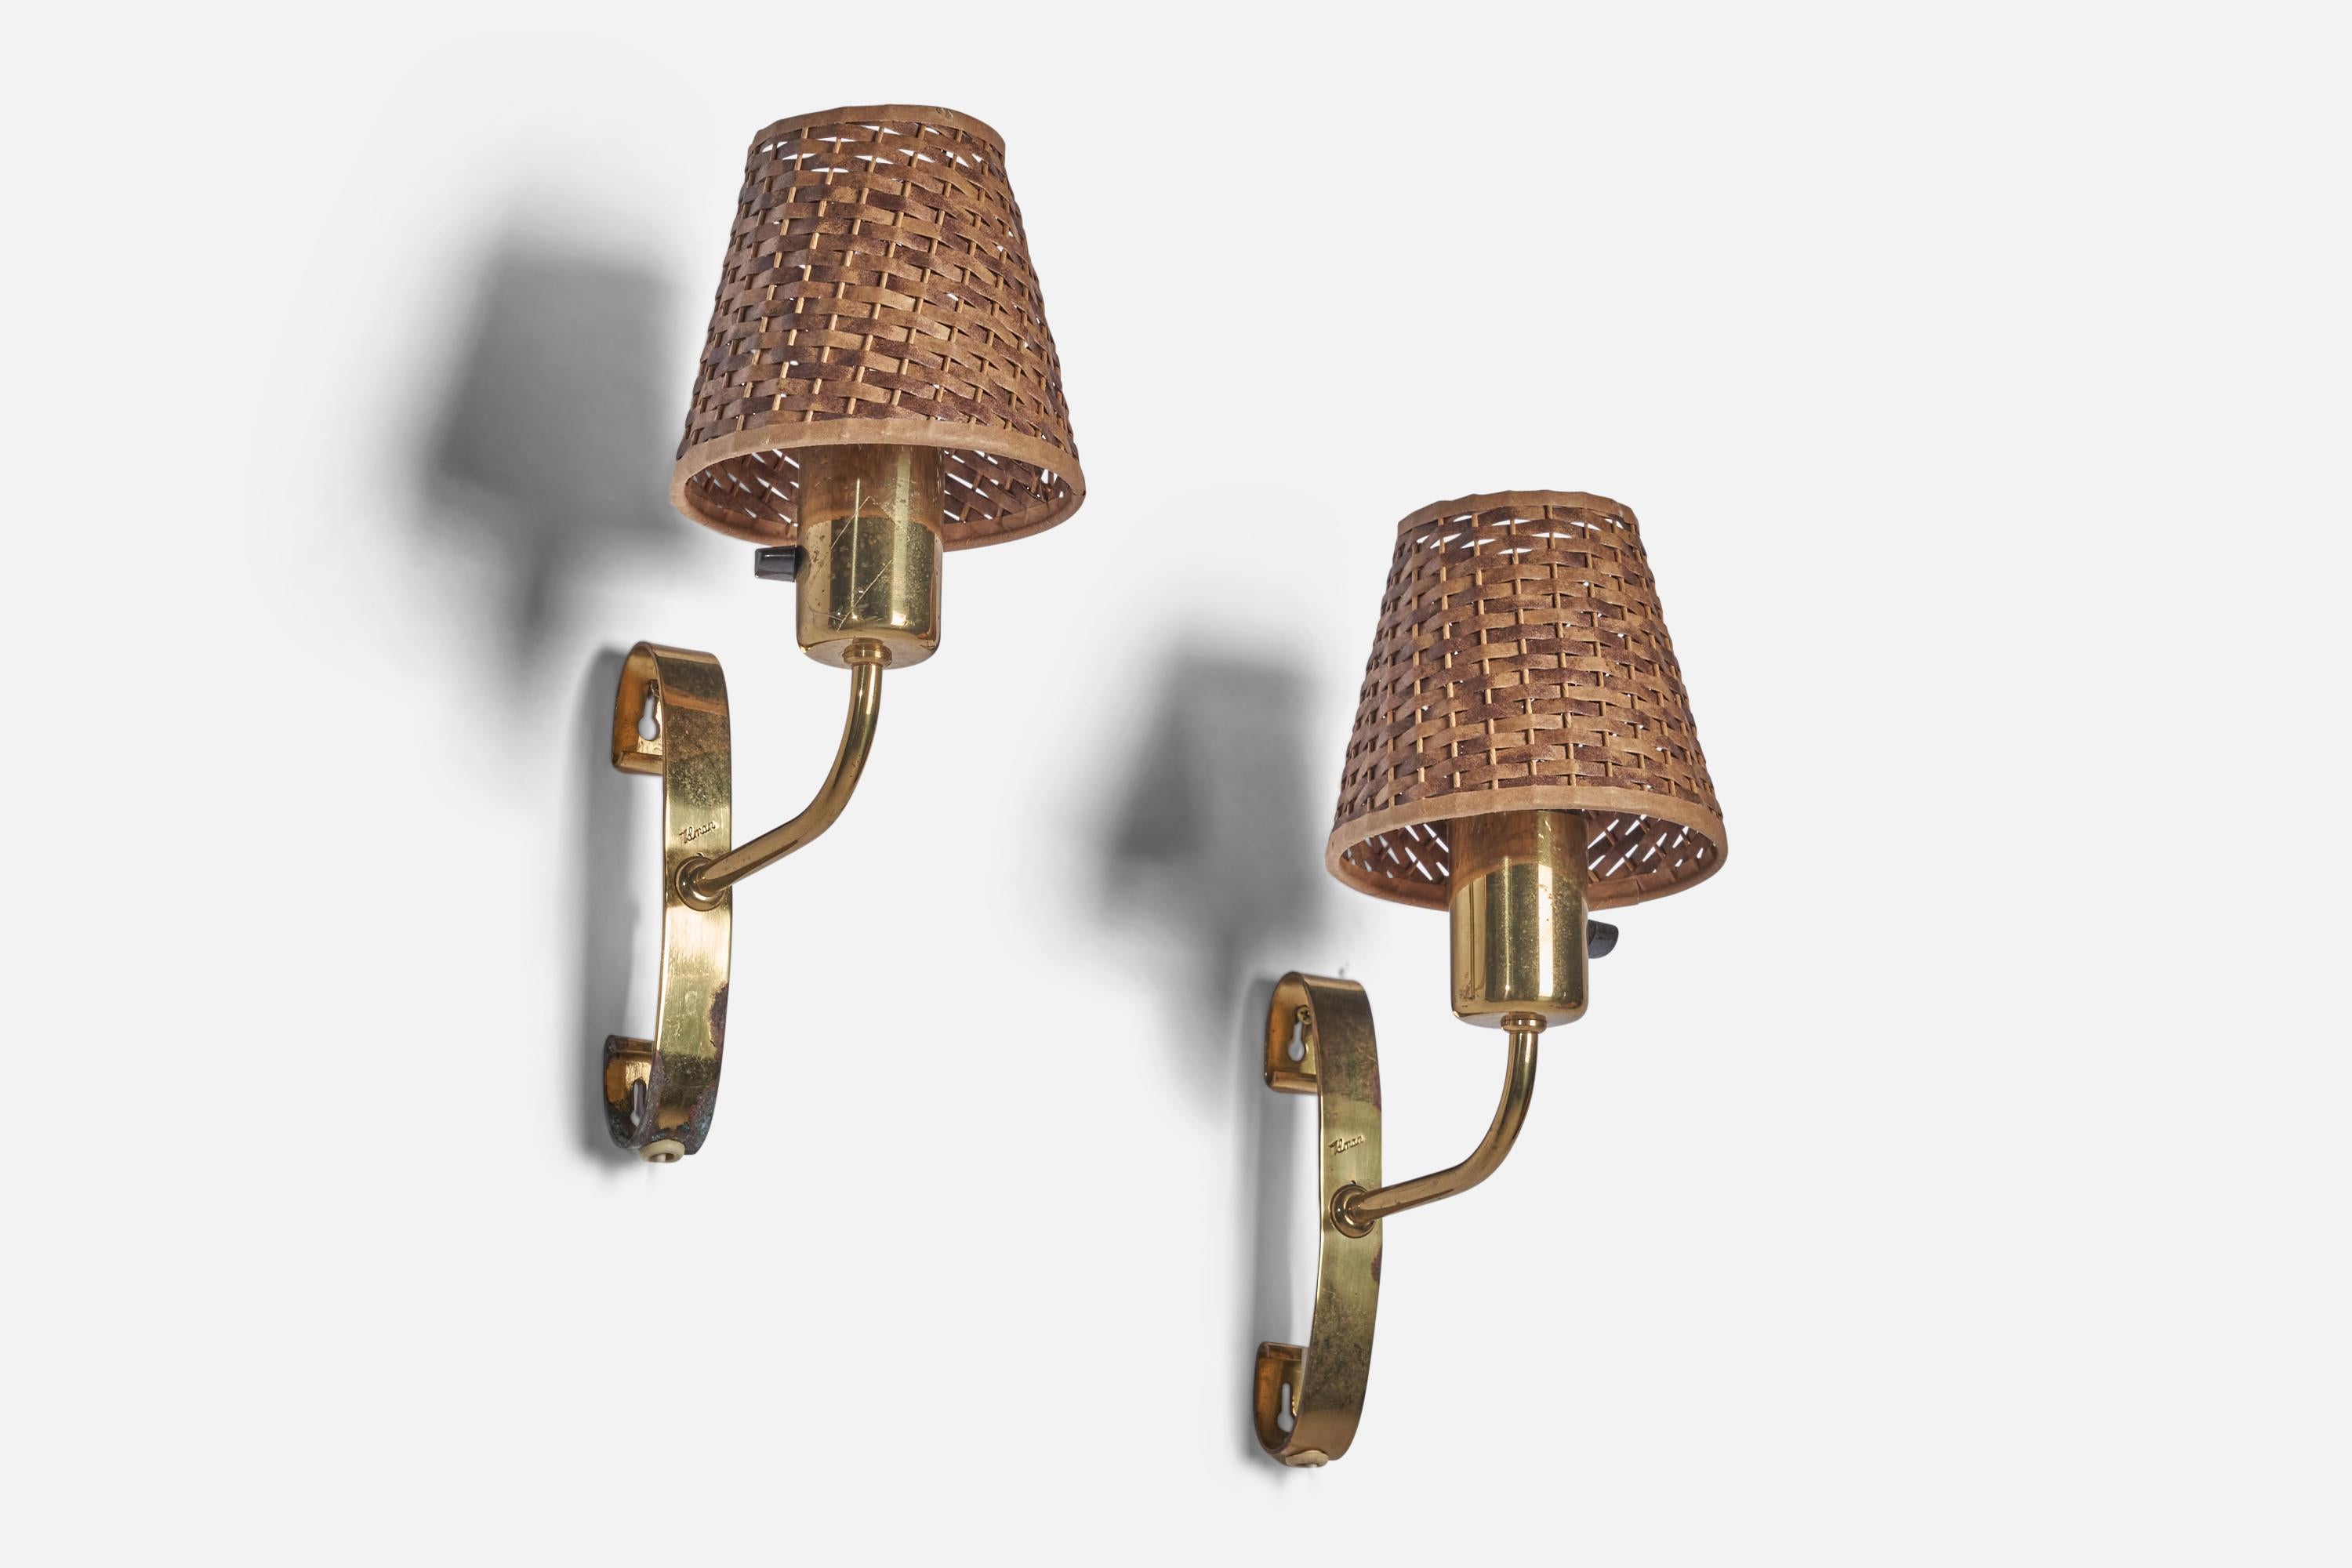 A pair of brass and rattan wall lights designed by Maria Lindeman and produced by Idman, Finland, c. 1950s.

Overall Dimensions (inches): 12” H x 5” W x 8.5” D
Back Plate Dimensions (inches): 6.5” H x 1” W x 1.5” D
Bulb Specifications: E-26